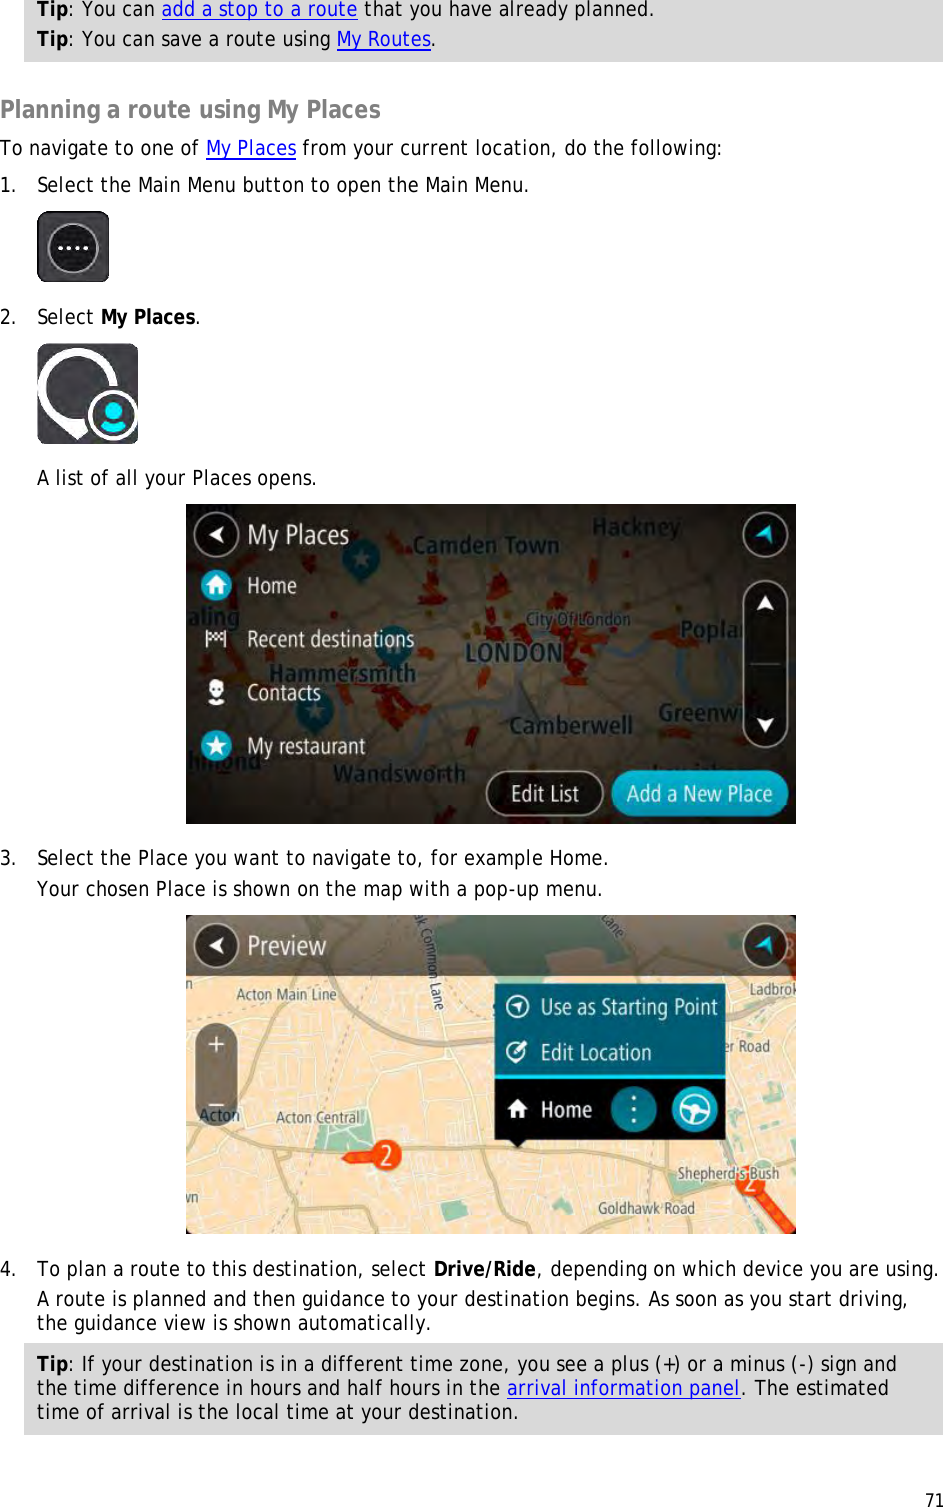  71  Tip: You can add a stop to a route that you have already planned. Tip: You can save a route using My Routes.  Planning a route using My Places To navigate to one of My Places from your current location, do the following: 1. Select the Main Menu button to open the Main Menu.   2. Select My Places.  A list of all your Places opens.  3. Select the Place you want to navigate to, for example Home. Your chosen Place is shown on the map with a pop-up menu.  4. To plan a route to this destination, select Drive/Ride, depending on which device you are using. A route is planned and then guidance to your destination begins. As soon as you start driving, the guidance view is shown automatically. Tip: If your destination is in a different time zone, you see a plus (+) or a minus (-) sign and the time difference in hours and half hours in the arrival information panel. The estimated time of arrival is the local time at your destination. 